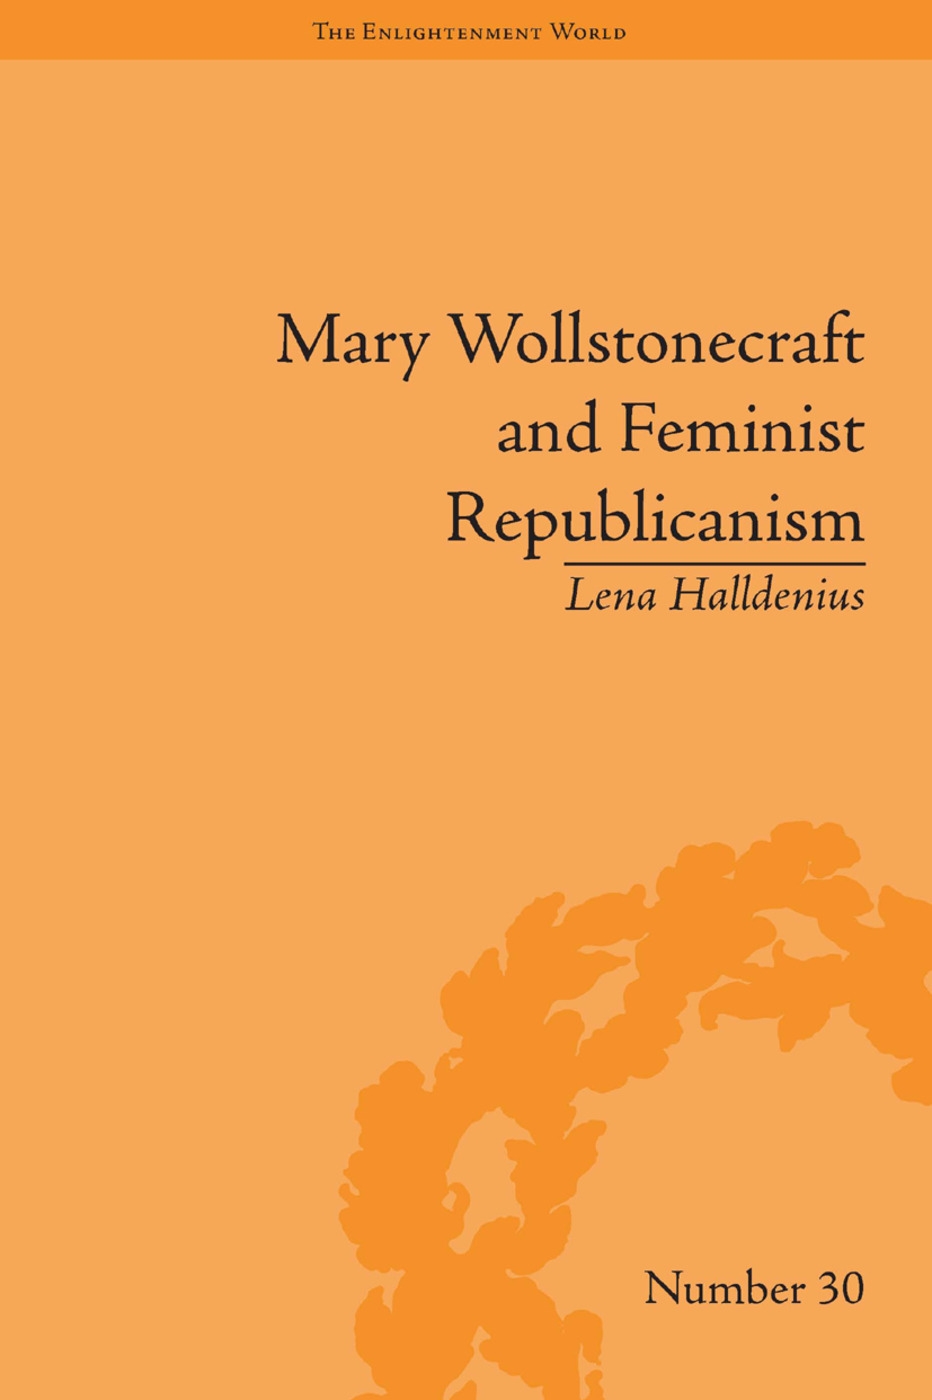 Mary Wollstonecraft and Feminist Republicanism: Independence, Rights and the Experience of Unfreedom